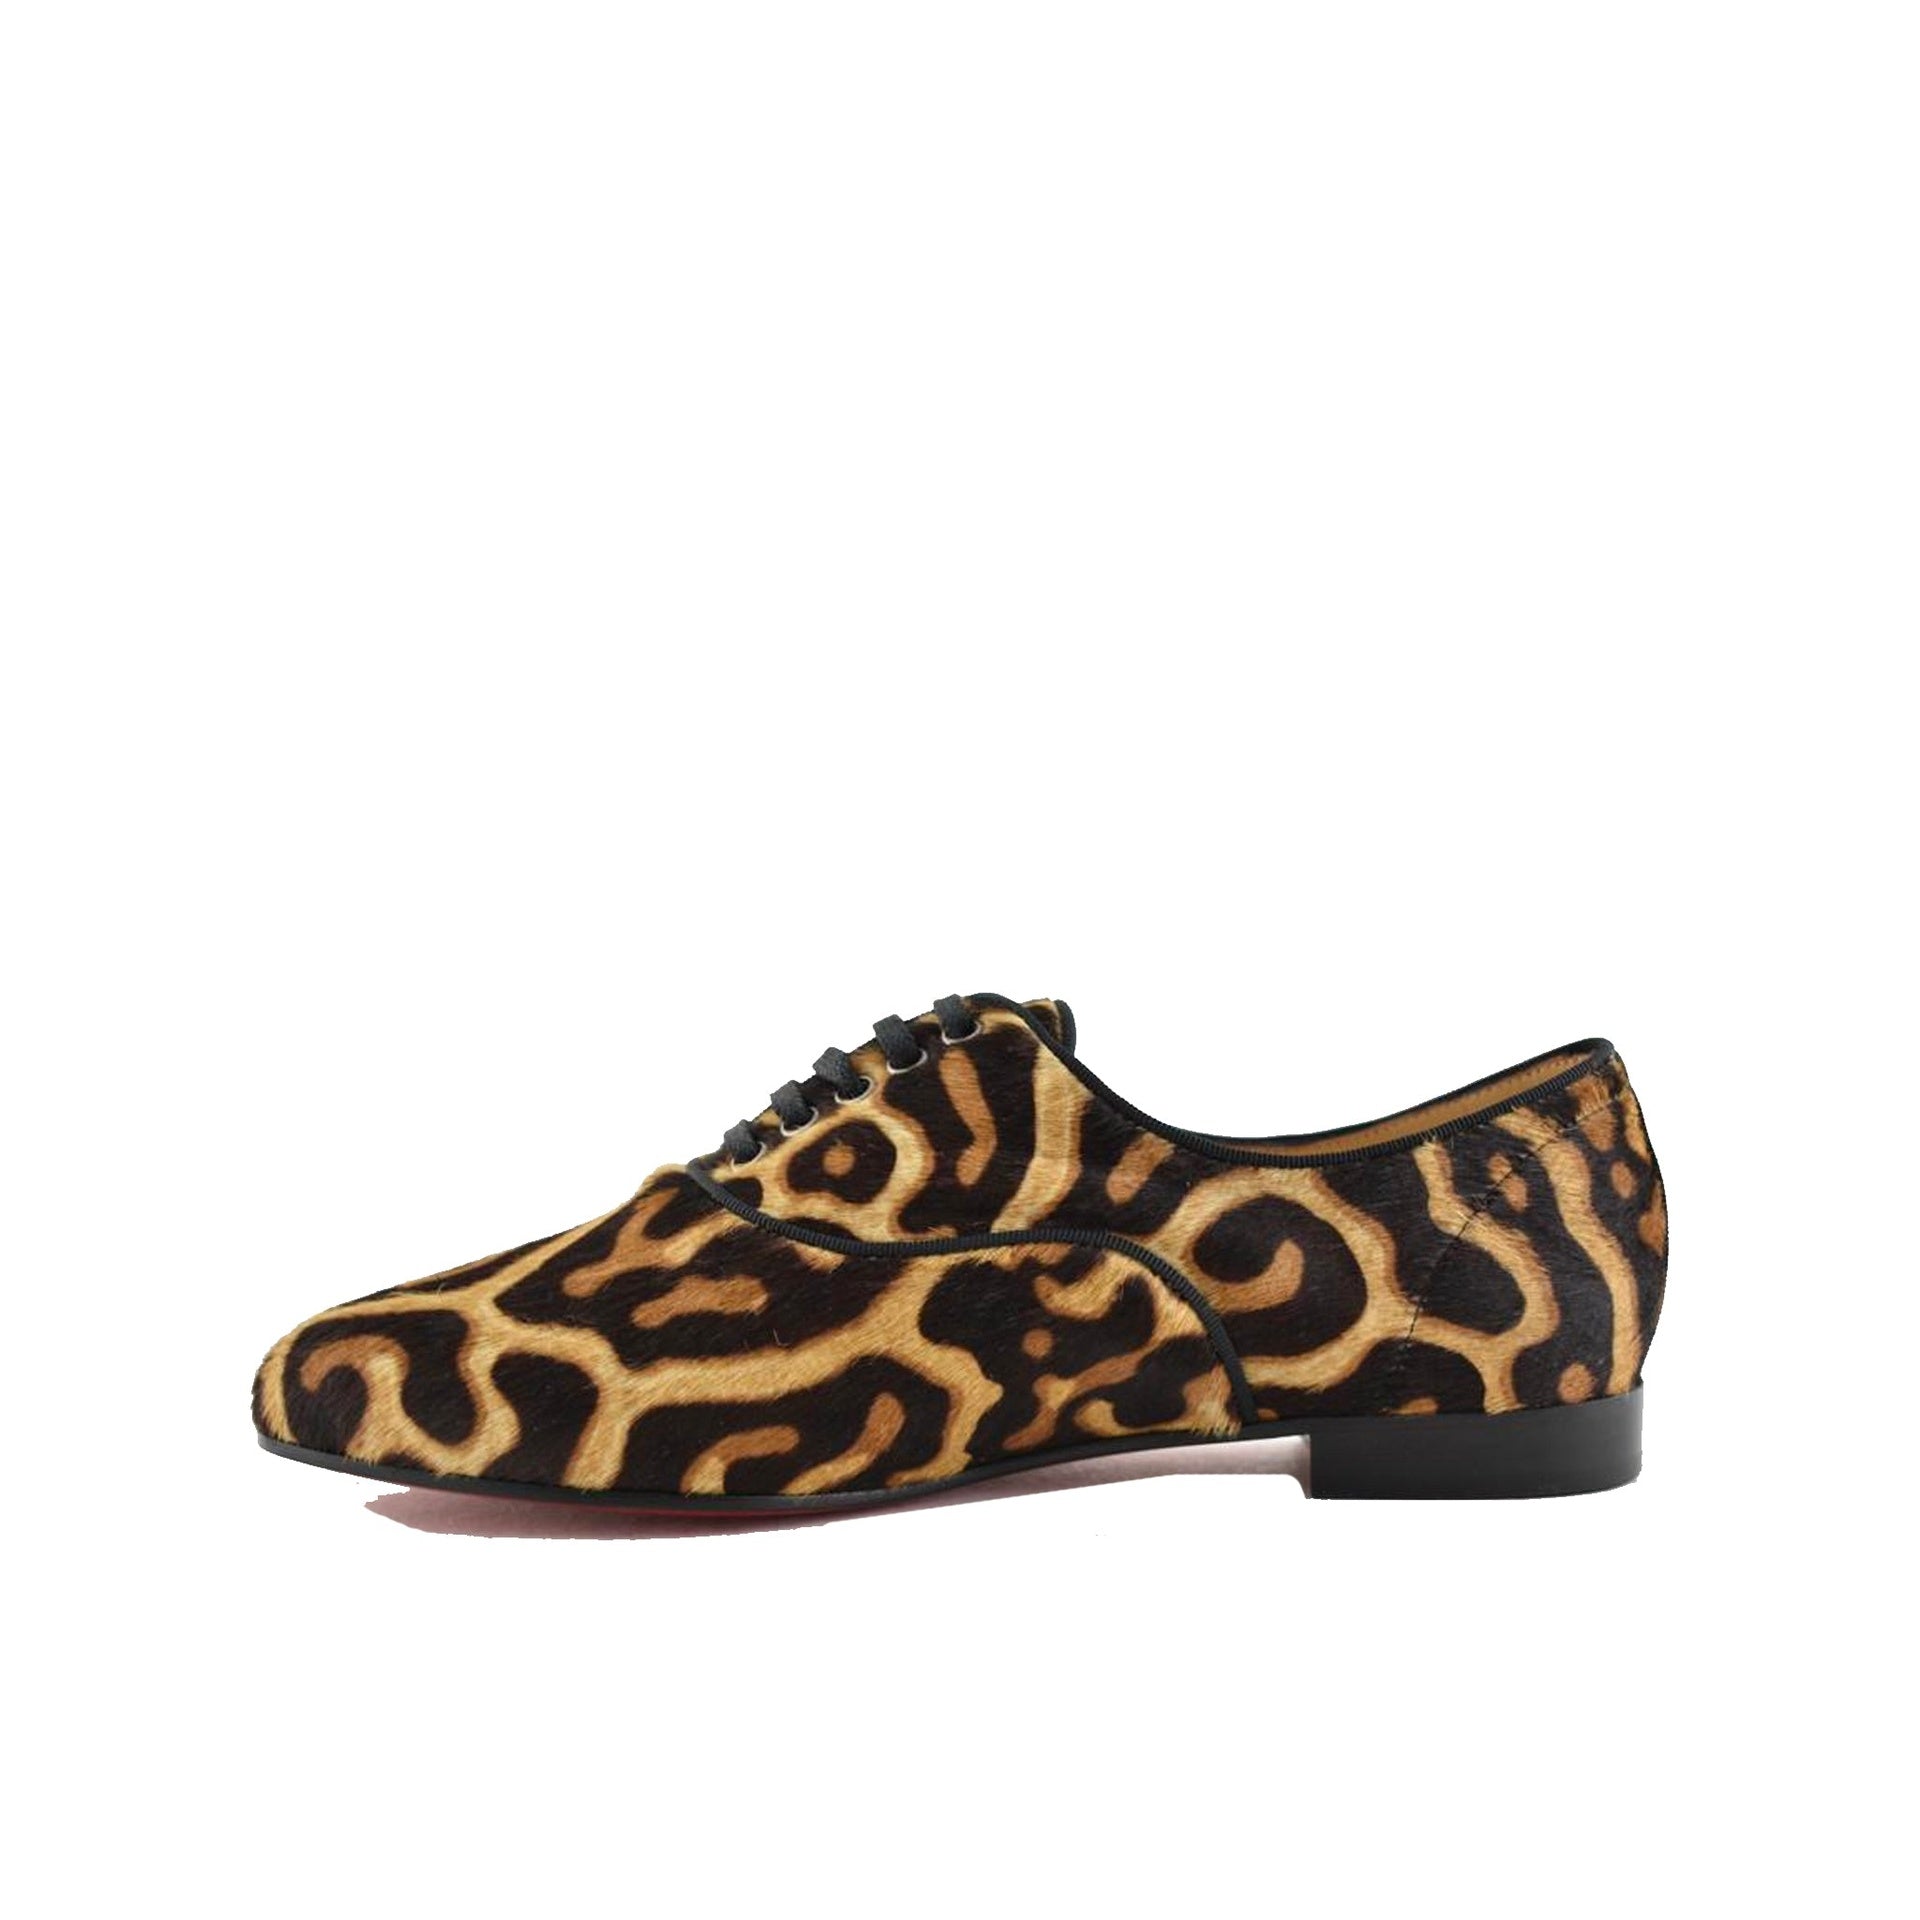 CHRISTIAN-LOUBOUTIN-OUTLET-SALE-Christian-Louboutin-New-Fred-Leopard-Flats-Flache-Schuhe-BROWN-36-ARCHIVE-COLLECTION-3.jpg